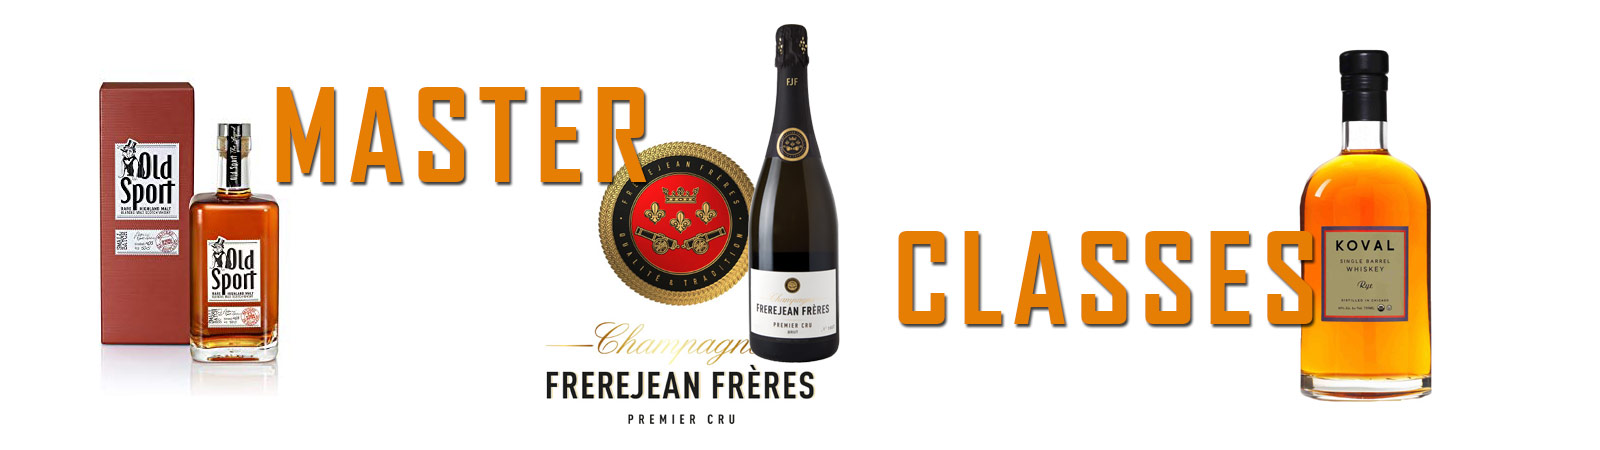 Masterclass Wine, Beer and Spirits Banner